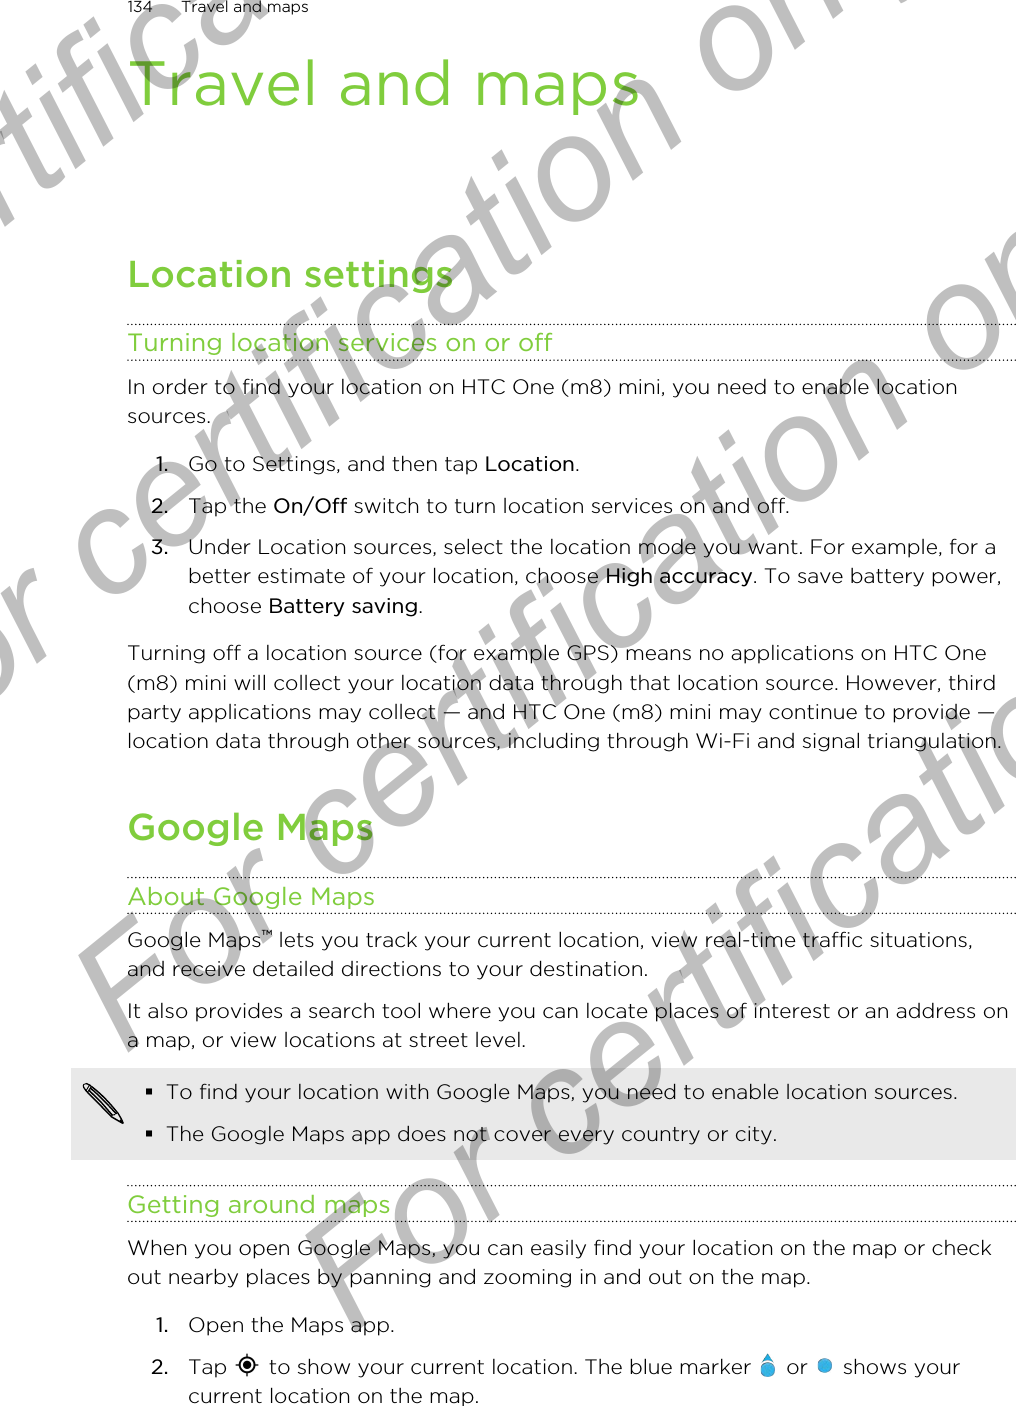 Travel and mapsLocation settingsTurning location services on or offIn order to find your location on HTC One (m8) mini, you need to enable locationsources.1. Go to Settings, and then tap Location.2. Tap the On/Off switch to turn location services on and off.3. Under Location sources, select the location mode you want. For example, for abetter estimate of your location, choose High accuracy. To save battery power,choose Battery saving.Turning off a location source (for example GPS) means no applications on HTC One(m8) mini will collect your location data through that location source. However, thirdparty applications may collect — and HTC One (m8) mini may continue to provide —location data through other sources, including through Wi-Fi and signal triangulation.Google MapsAbout Google MapsGoogle Maps™ lets you track your current location, view real-time traffic situations,and receive detailed directions to your destination.It also provides a search tool where you can locate places of interest or an address ona map, or view locations at street level.§To find your location with Google Maps, you need to enable location sources.§The Google Maps app does not cover every country or city.Getting around mapsWhen you open Google Maps, you can easily find your location on the map or checkout nearby places by panning and zooming in and out on the map.1. Open the Maps app.2. Tap   to show your current location. The blue marker   or   shows yourcurrent location on the map.134 Travel and mapsFor certification only  For certification only  For certification only  For certification only 